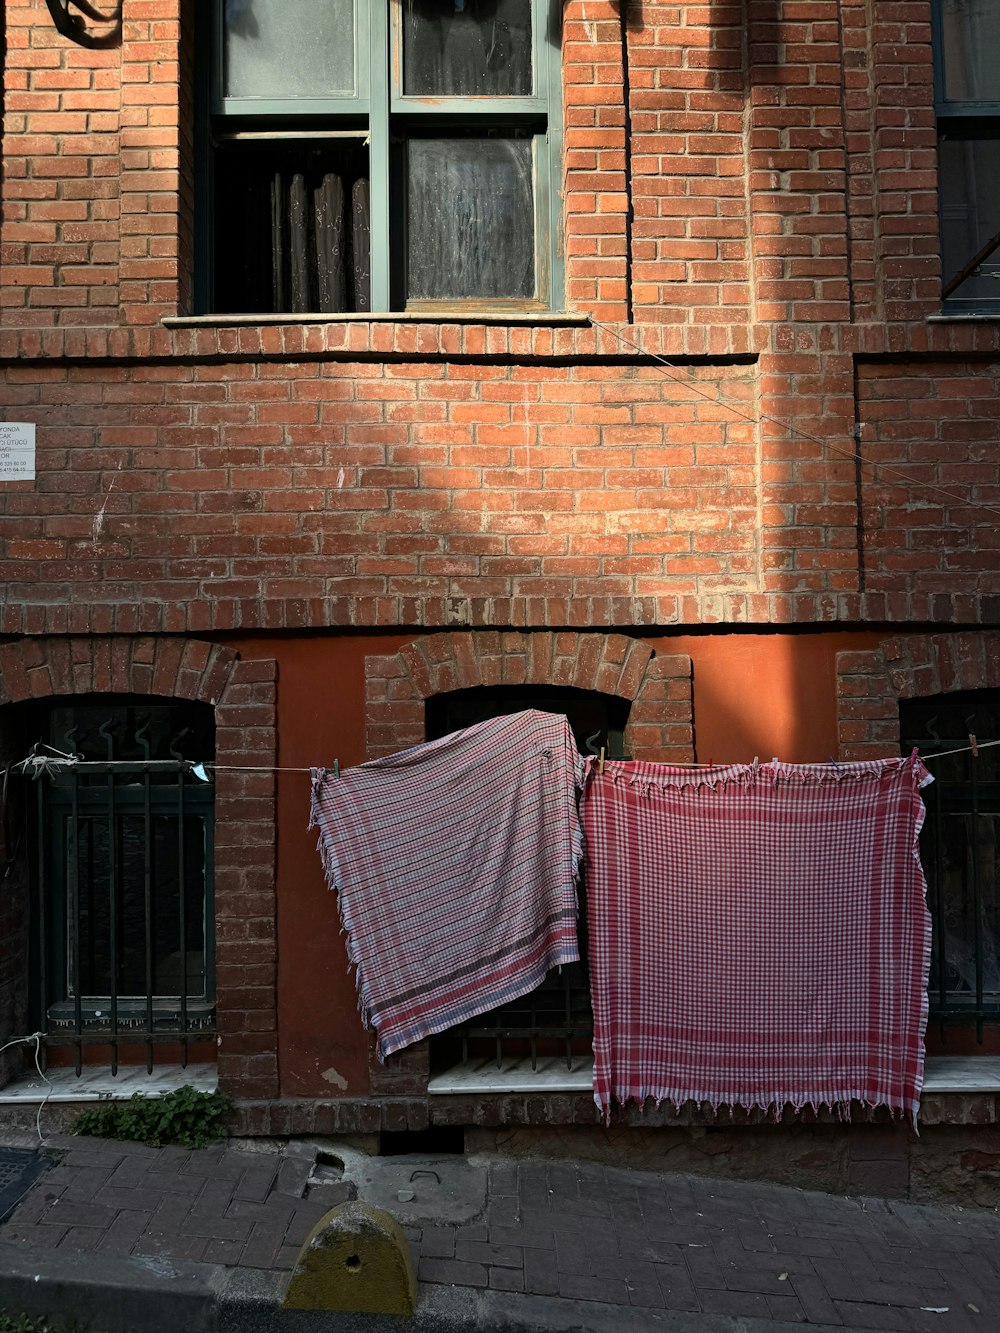 a red brick building with clothes hanging out to dry